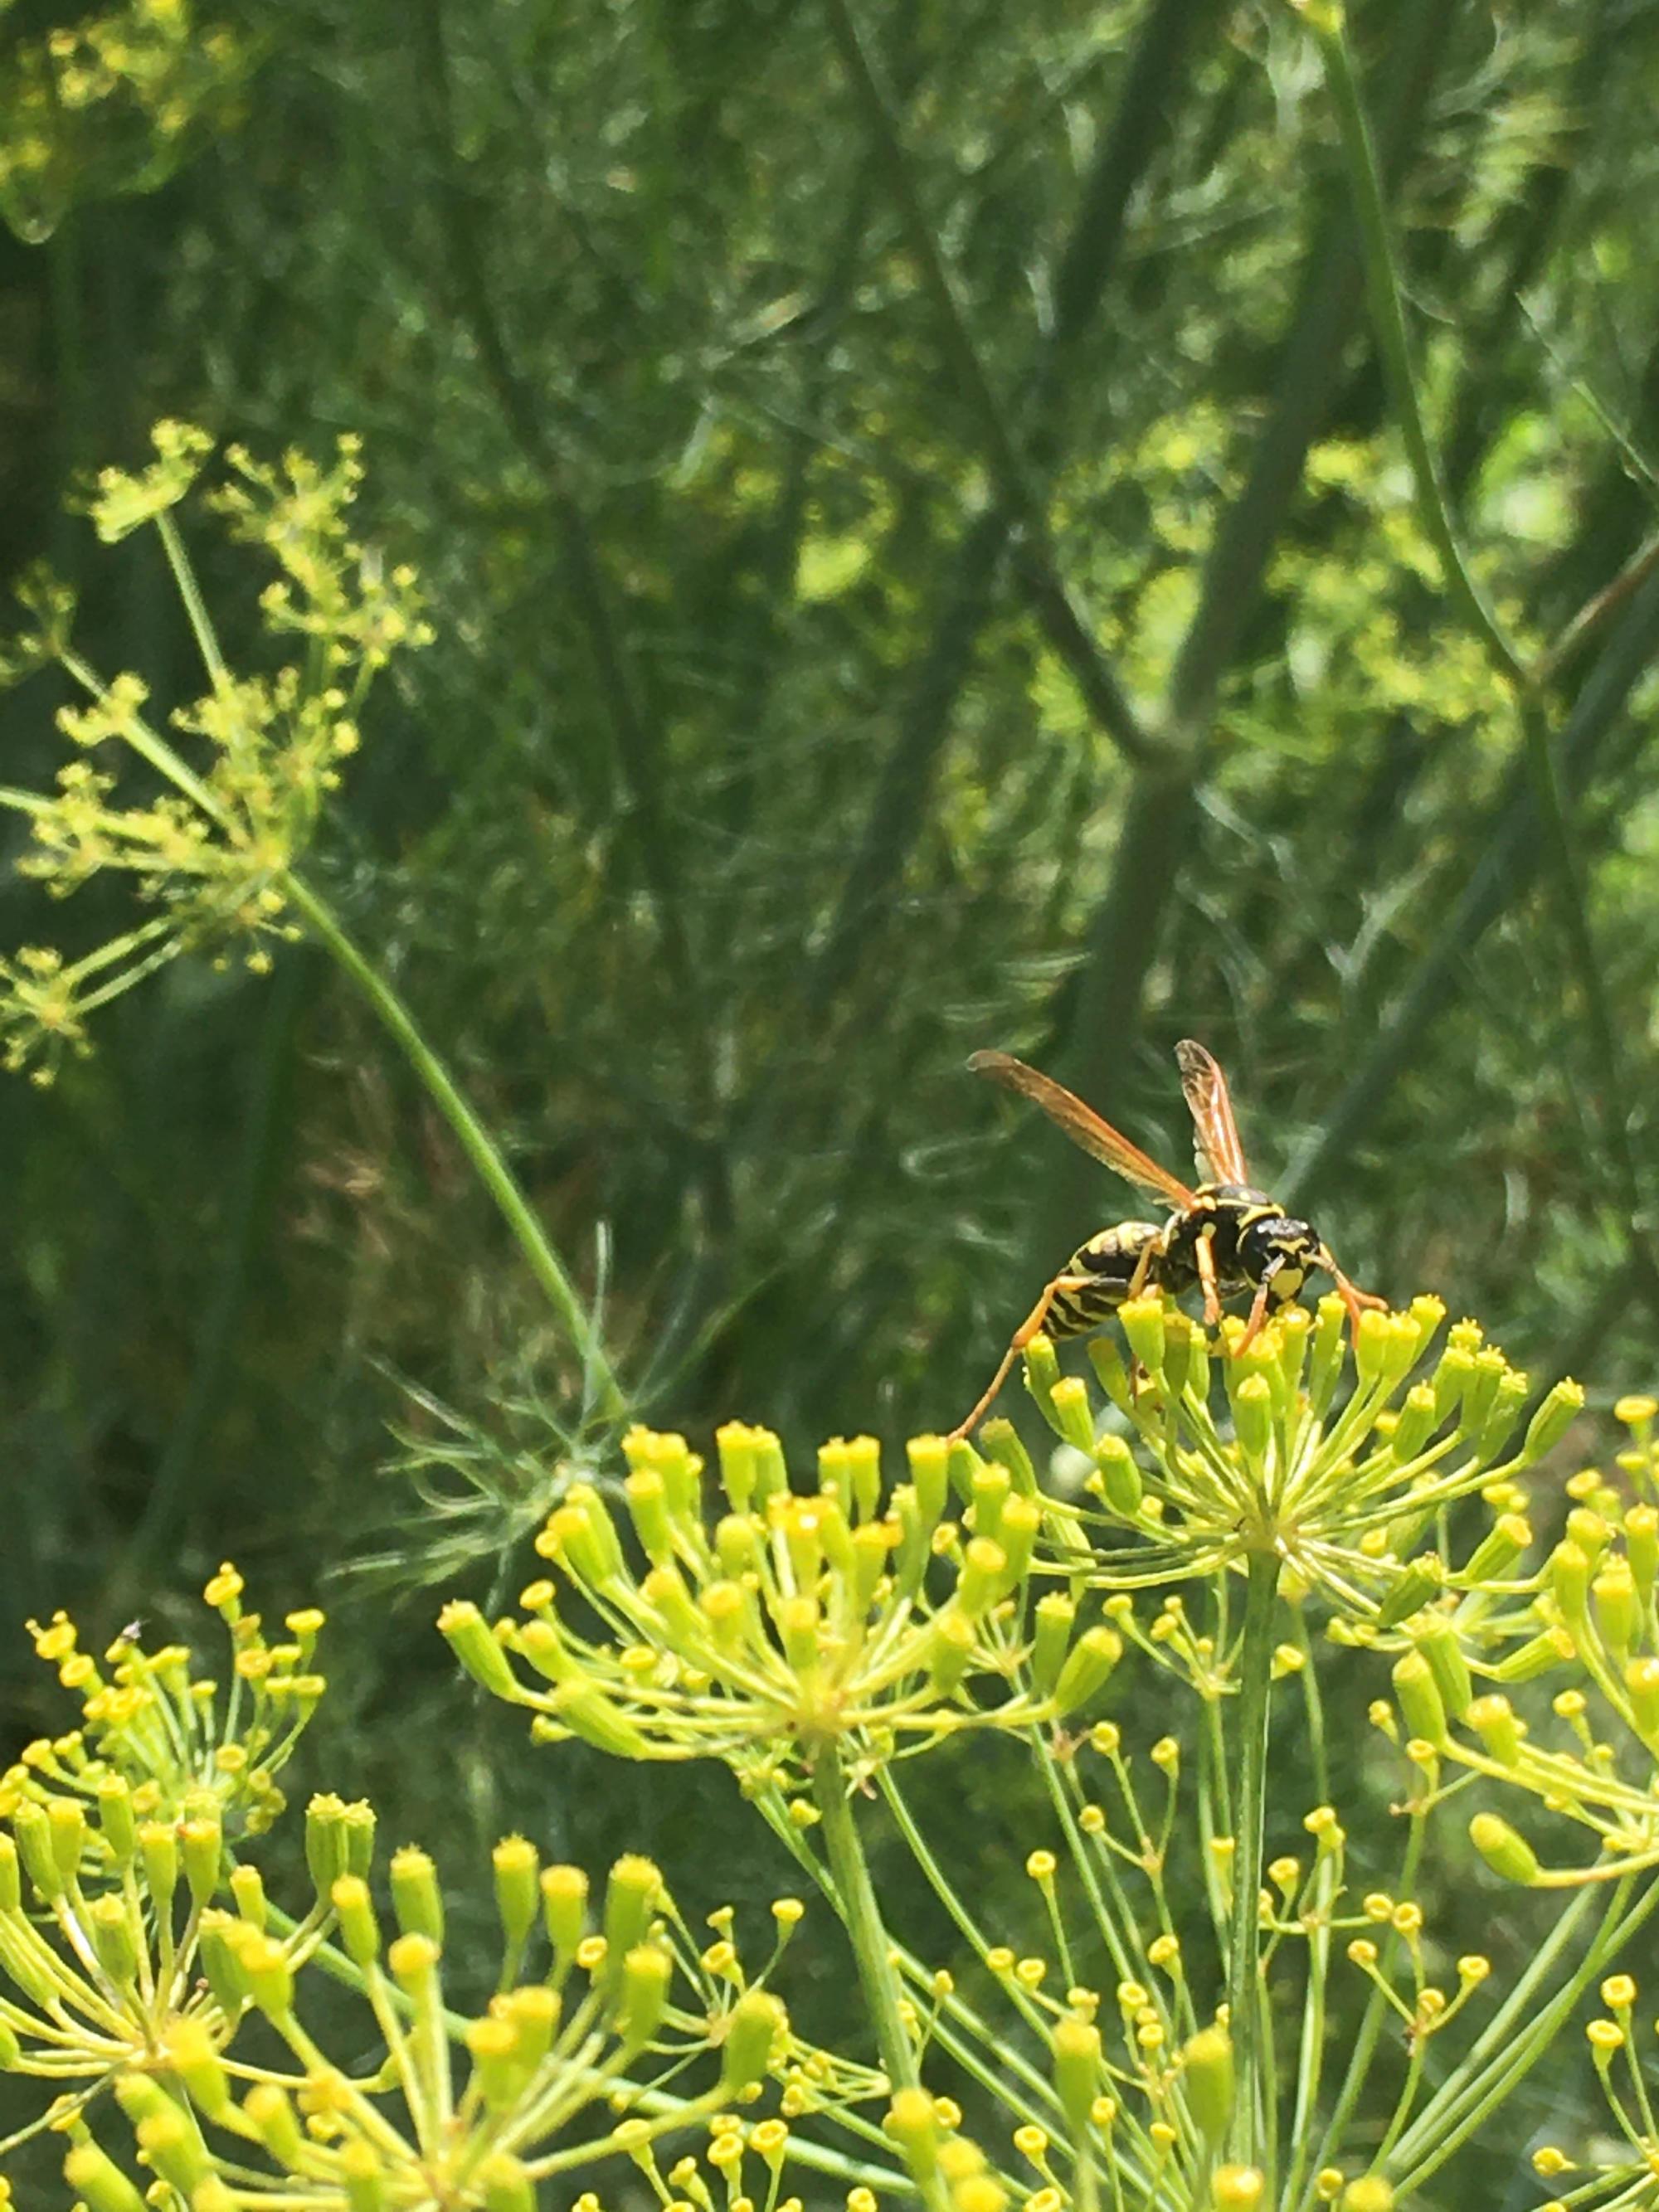 A Dickerson wasp lands atop a plant.